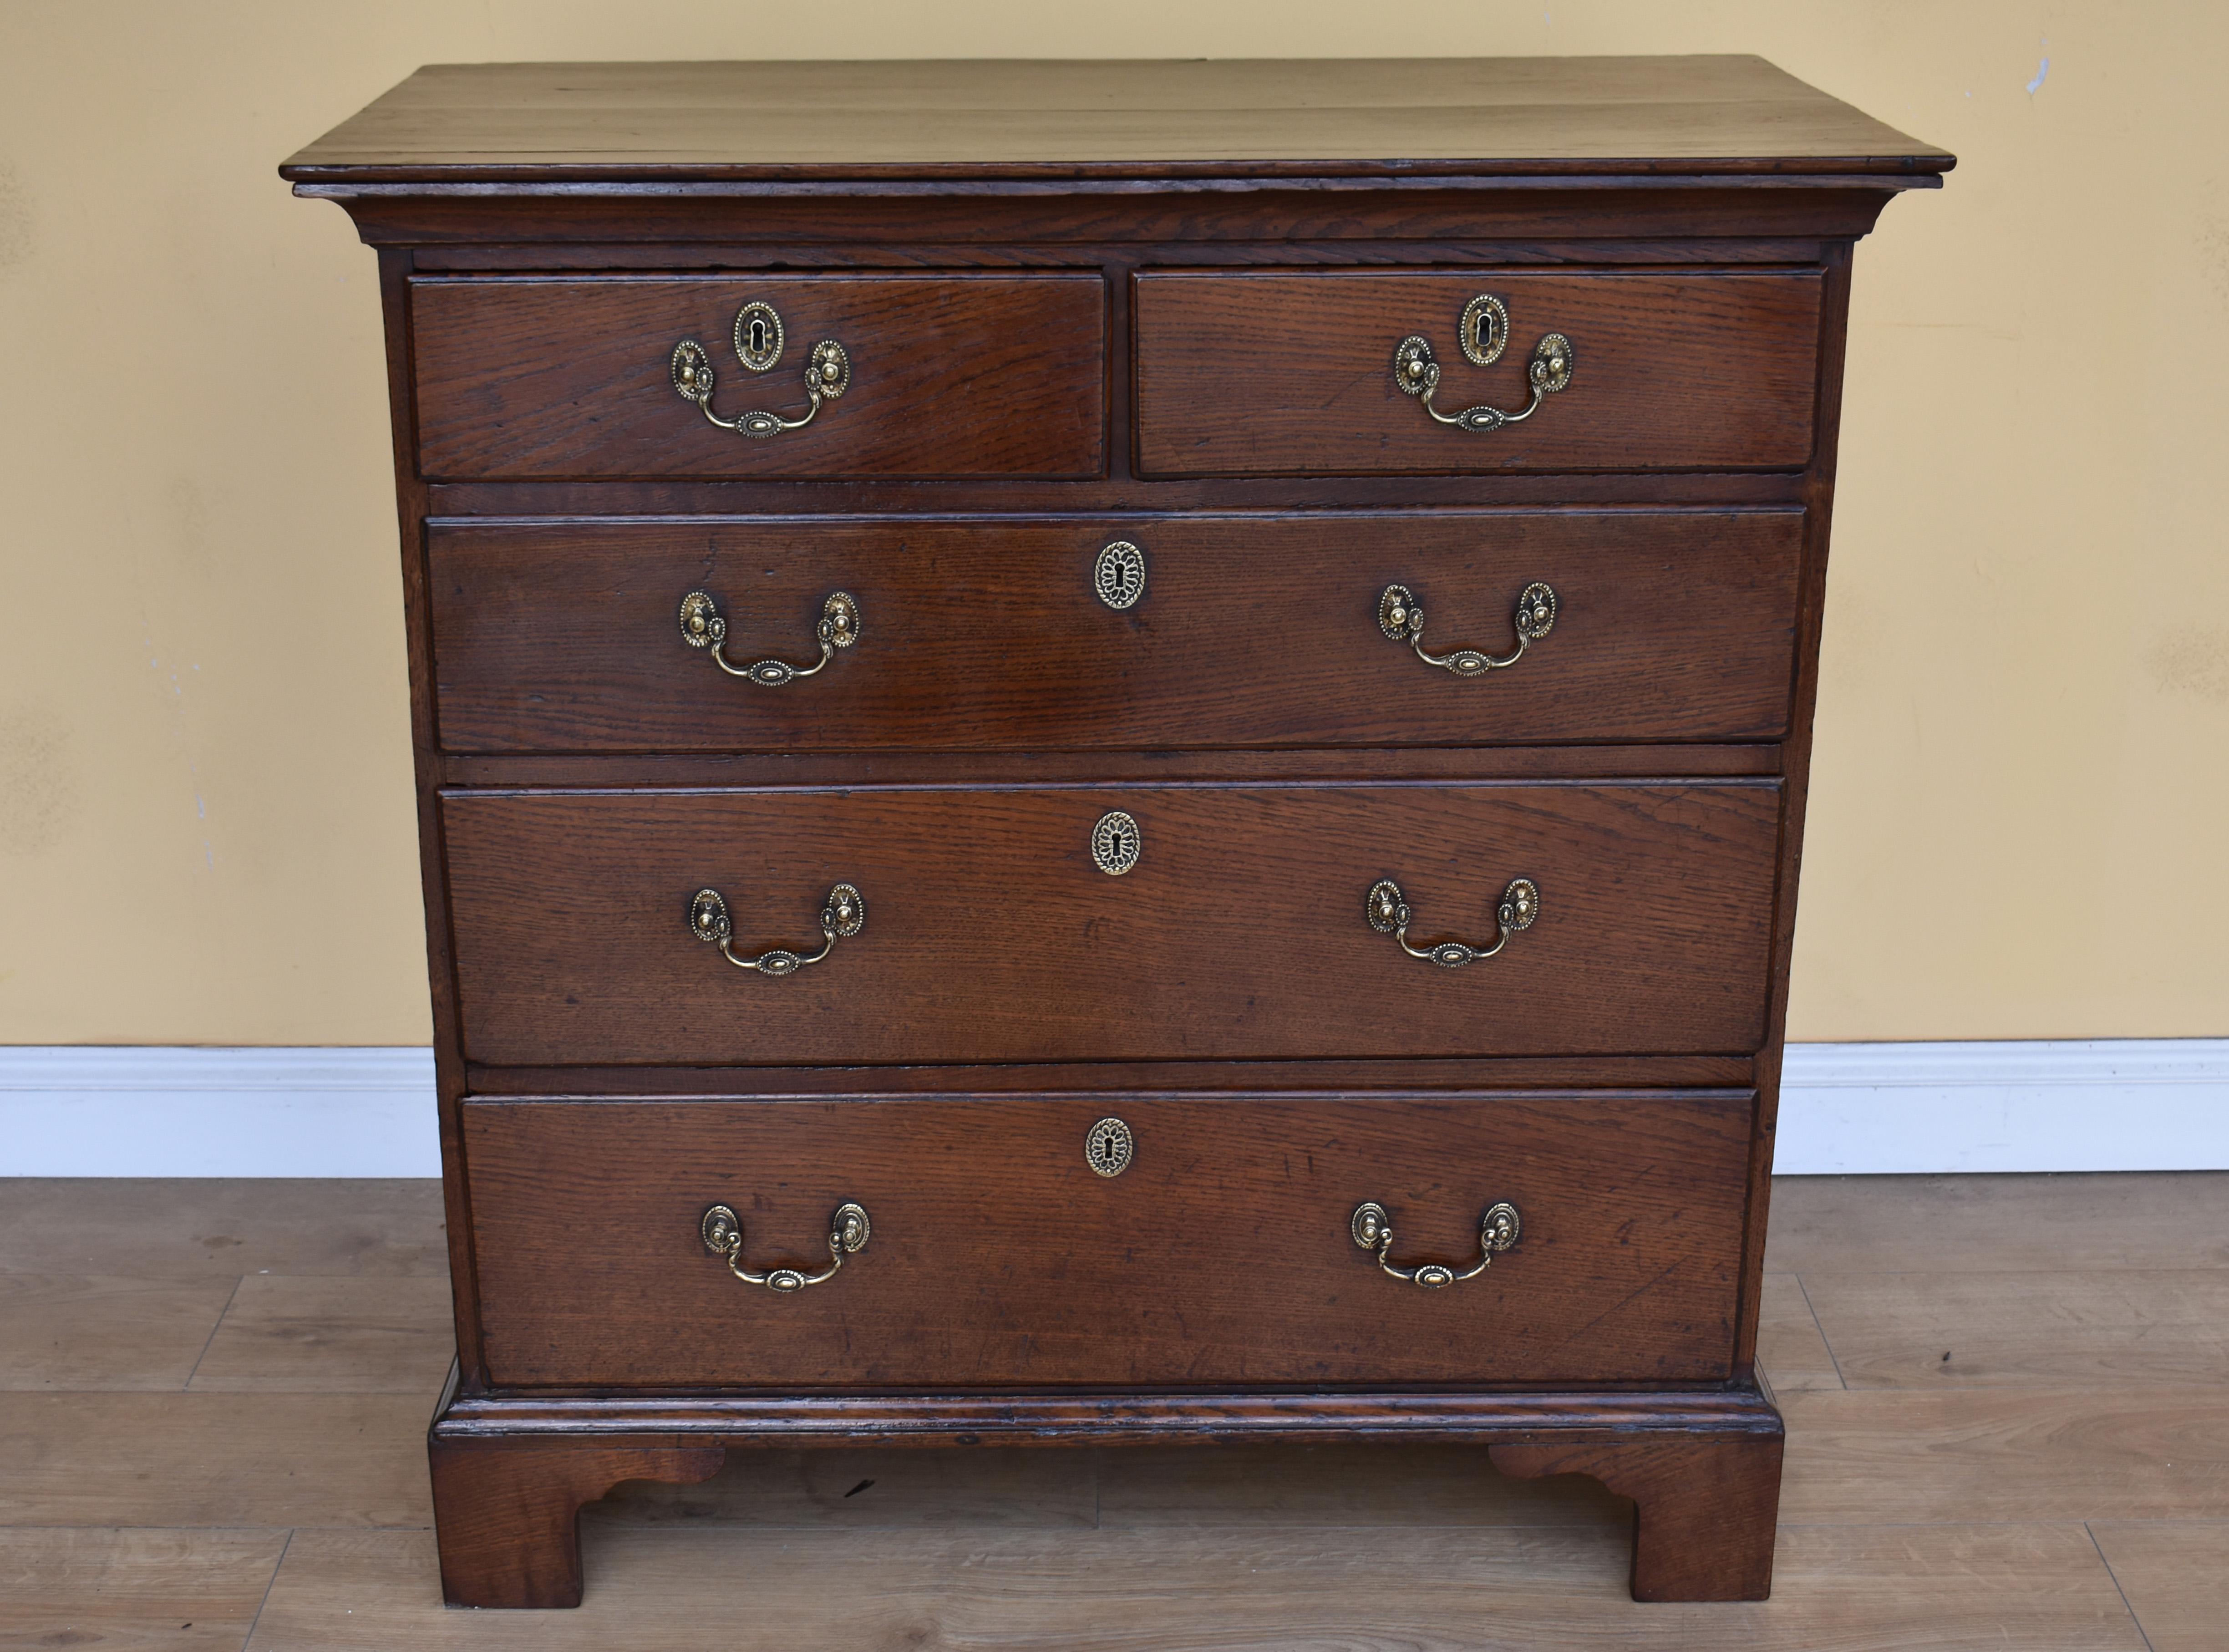 For sale is a good quality George III oak chest of drawers, having an arrangement of five drawers, each with their original handles and locks. The chest stands on bracket feet and is in very good condition for its age. 

Measures: Width 38